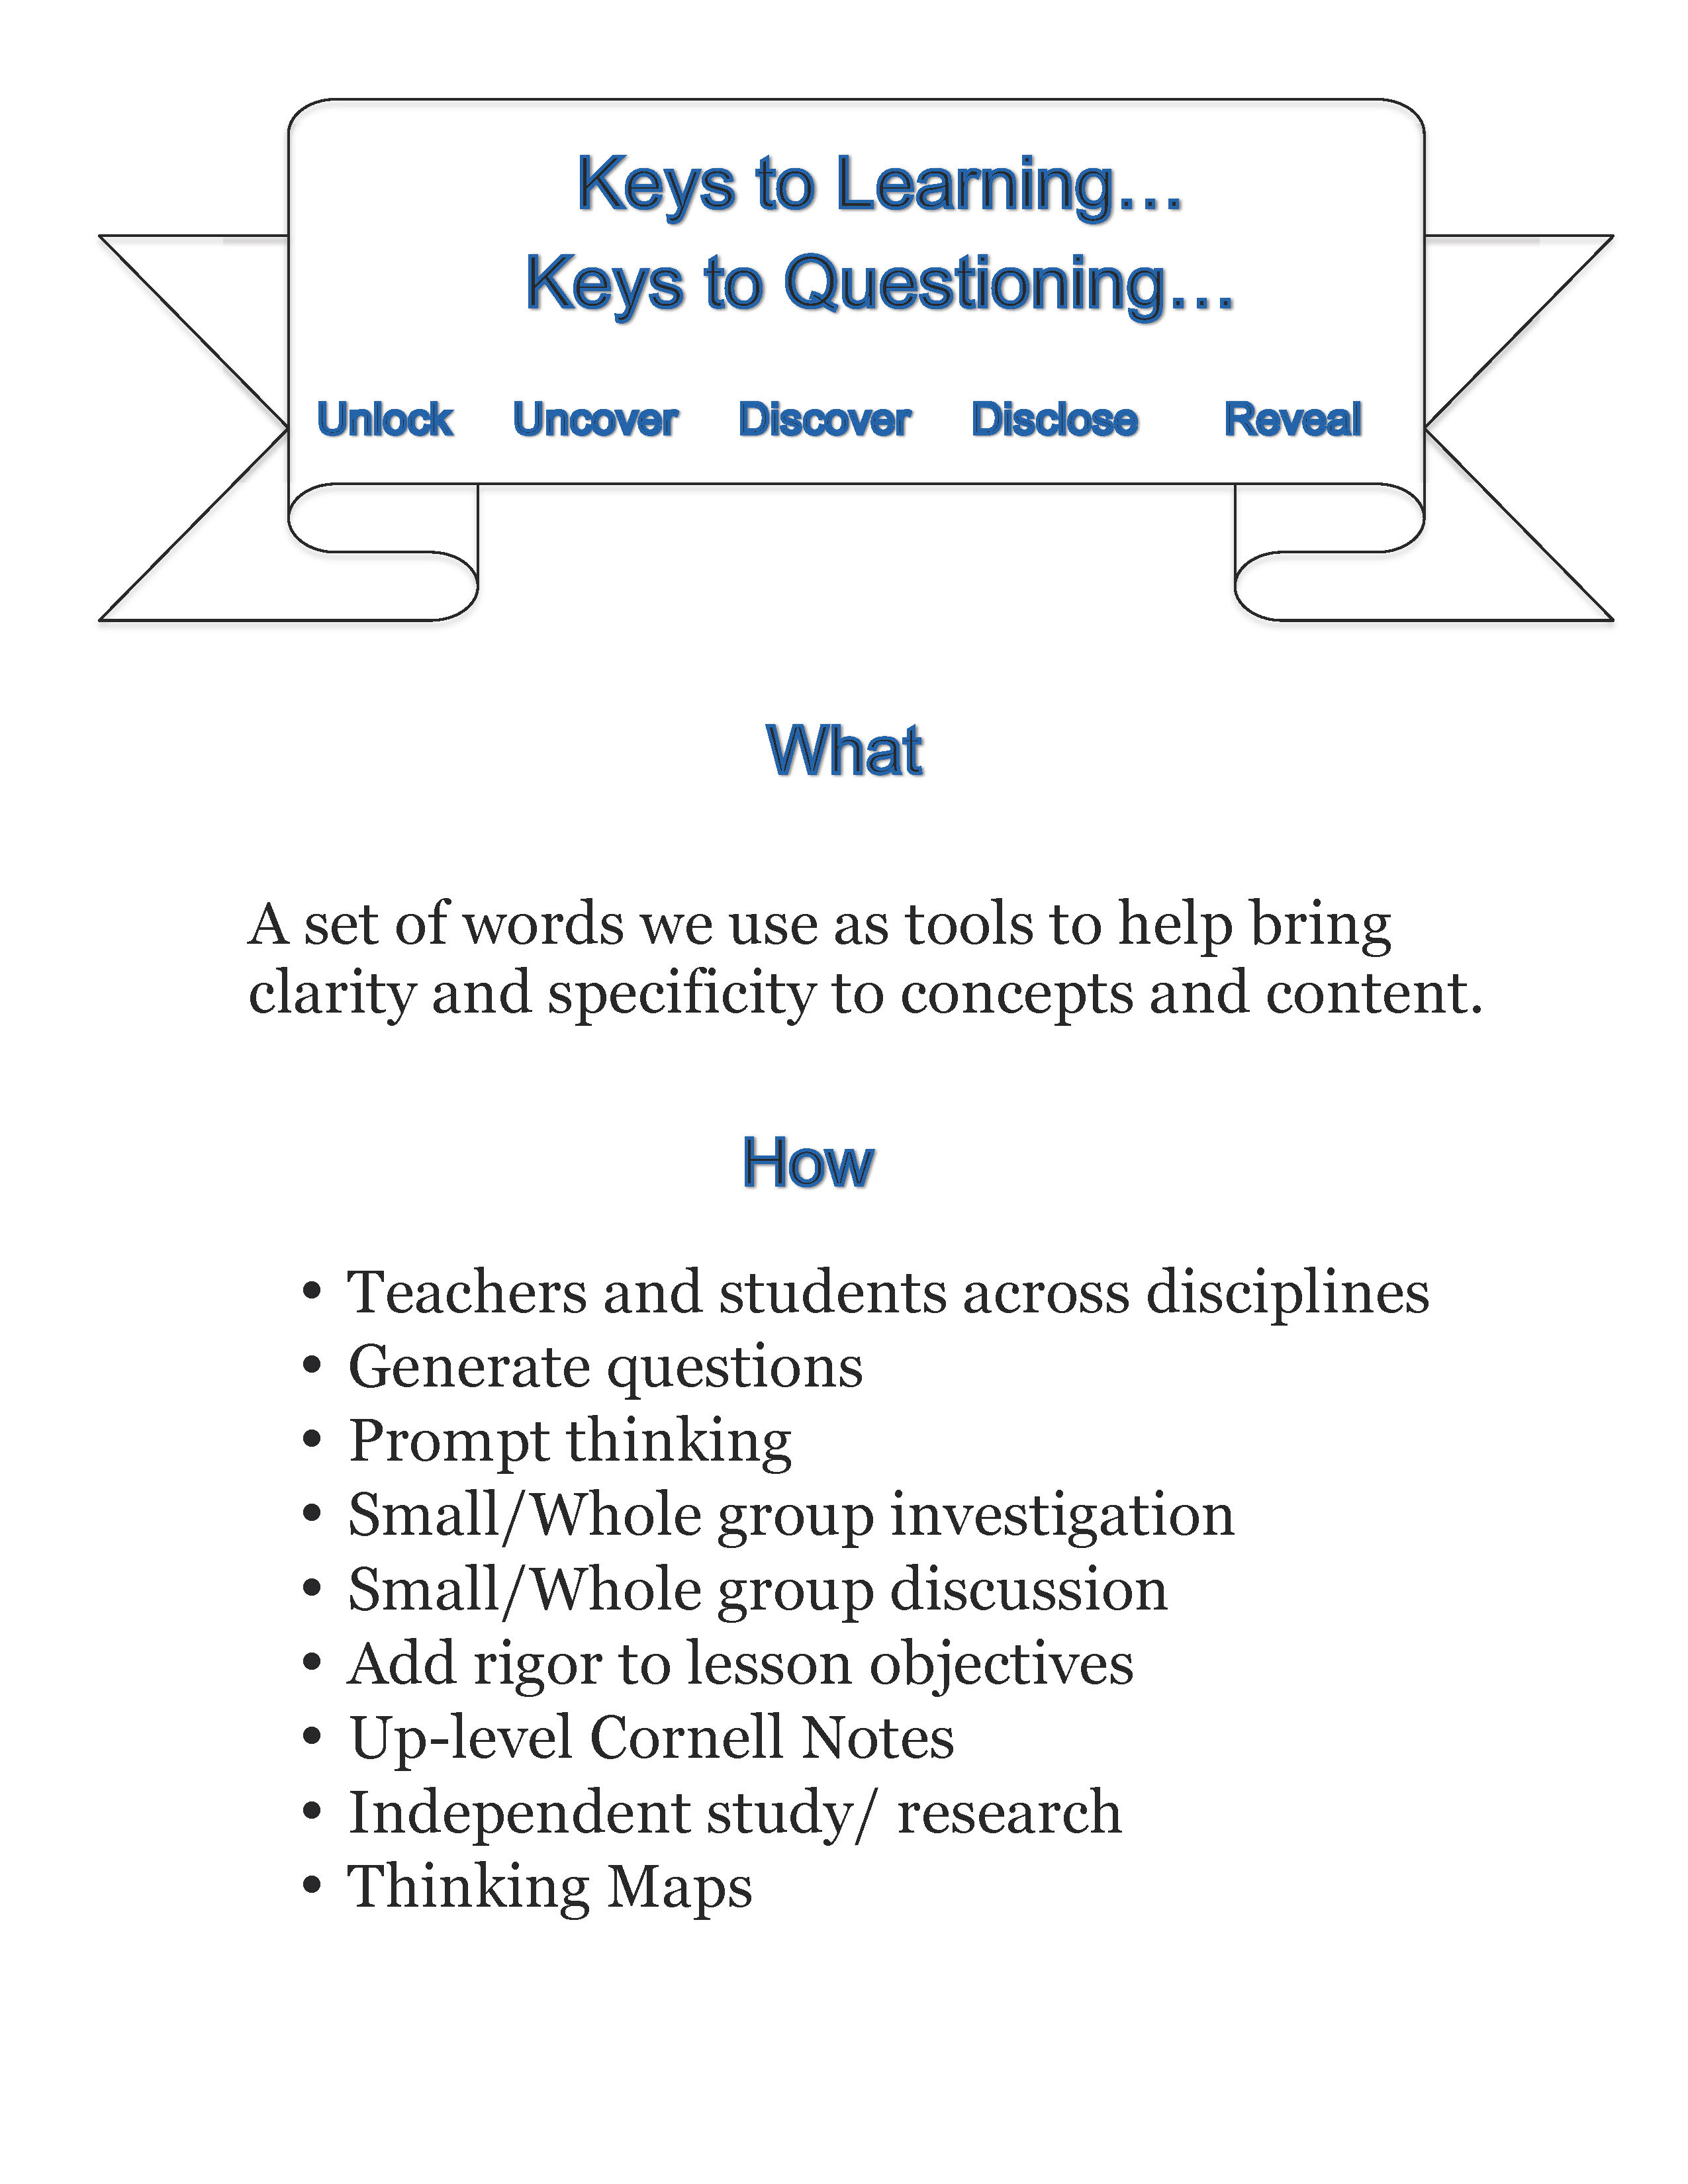 Envision Gifted. Keys-A set of words we use as tools to help bring clarity and specificity to concepts and content